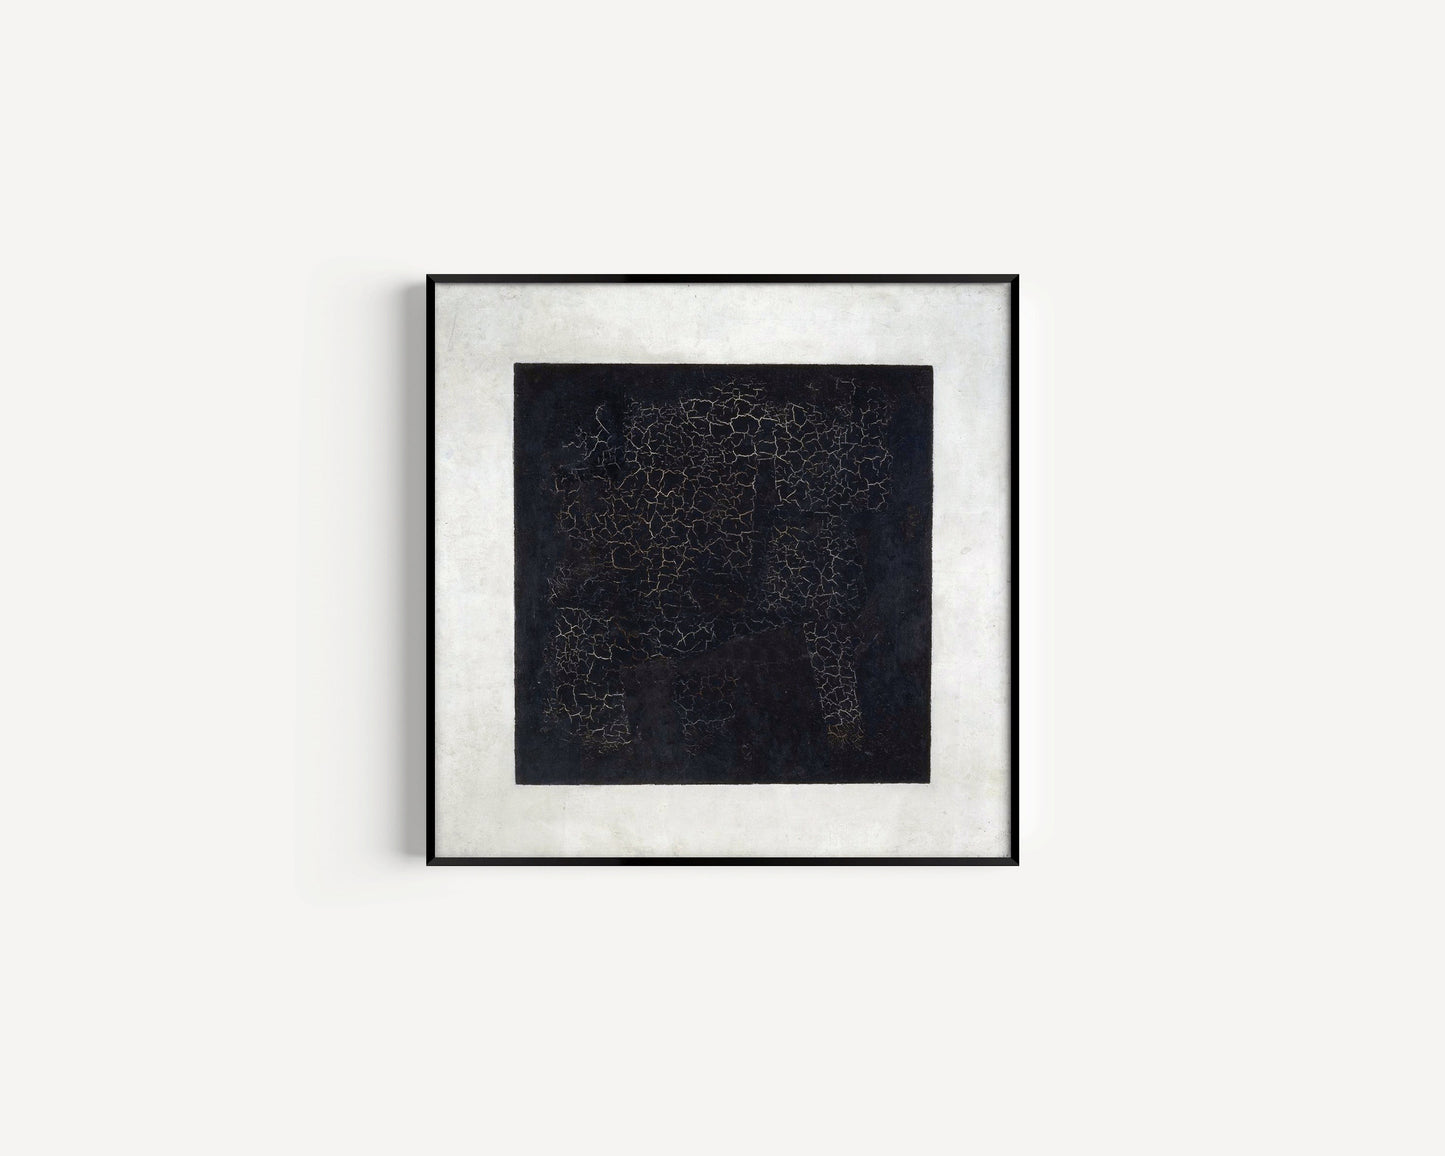 Vladimir Malevich - Black Suprematic | Famous Modern Abstract Black and White Art (available framed or unframed)